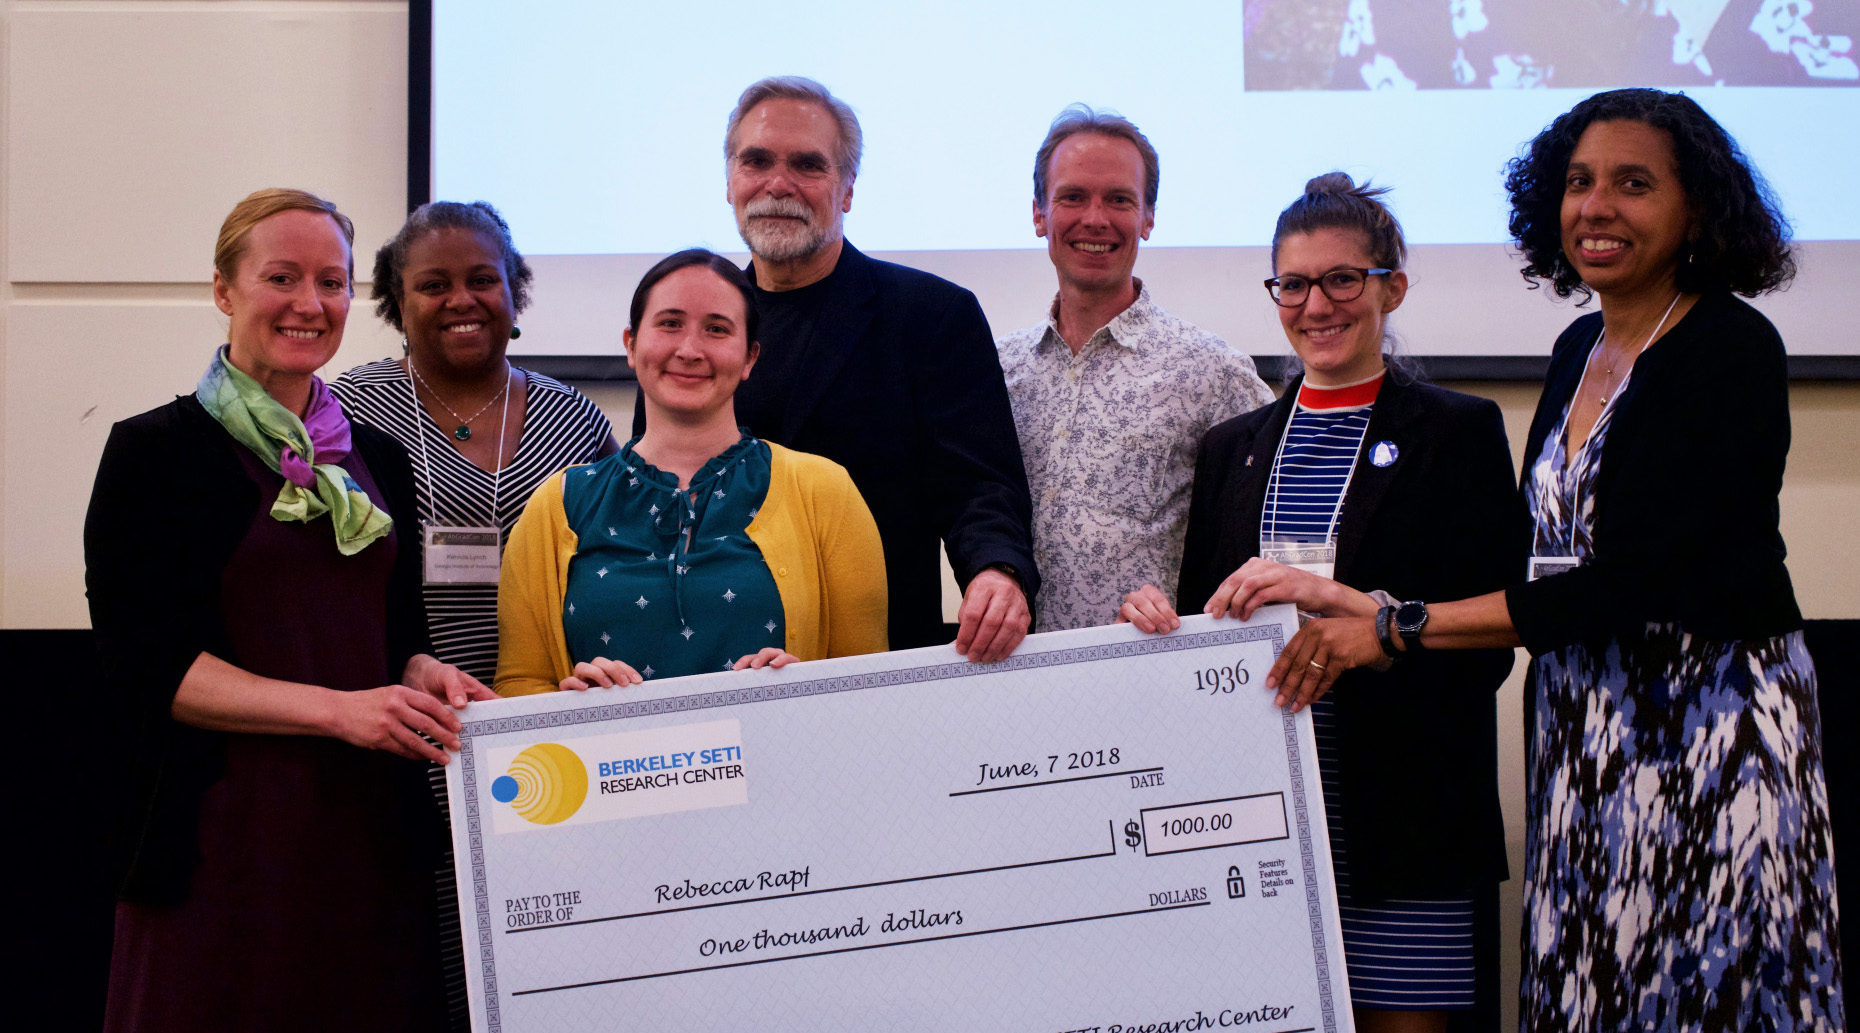 Rebecca Rapf awarded with the Maggie C. Turnbull Community Service Award at AbGradCon 2018. Image source: <a href="https://turnbullaward.org/" target="_blank">https://turnbullaward.org/</a>. Image credit: None